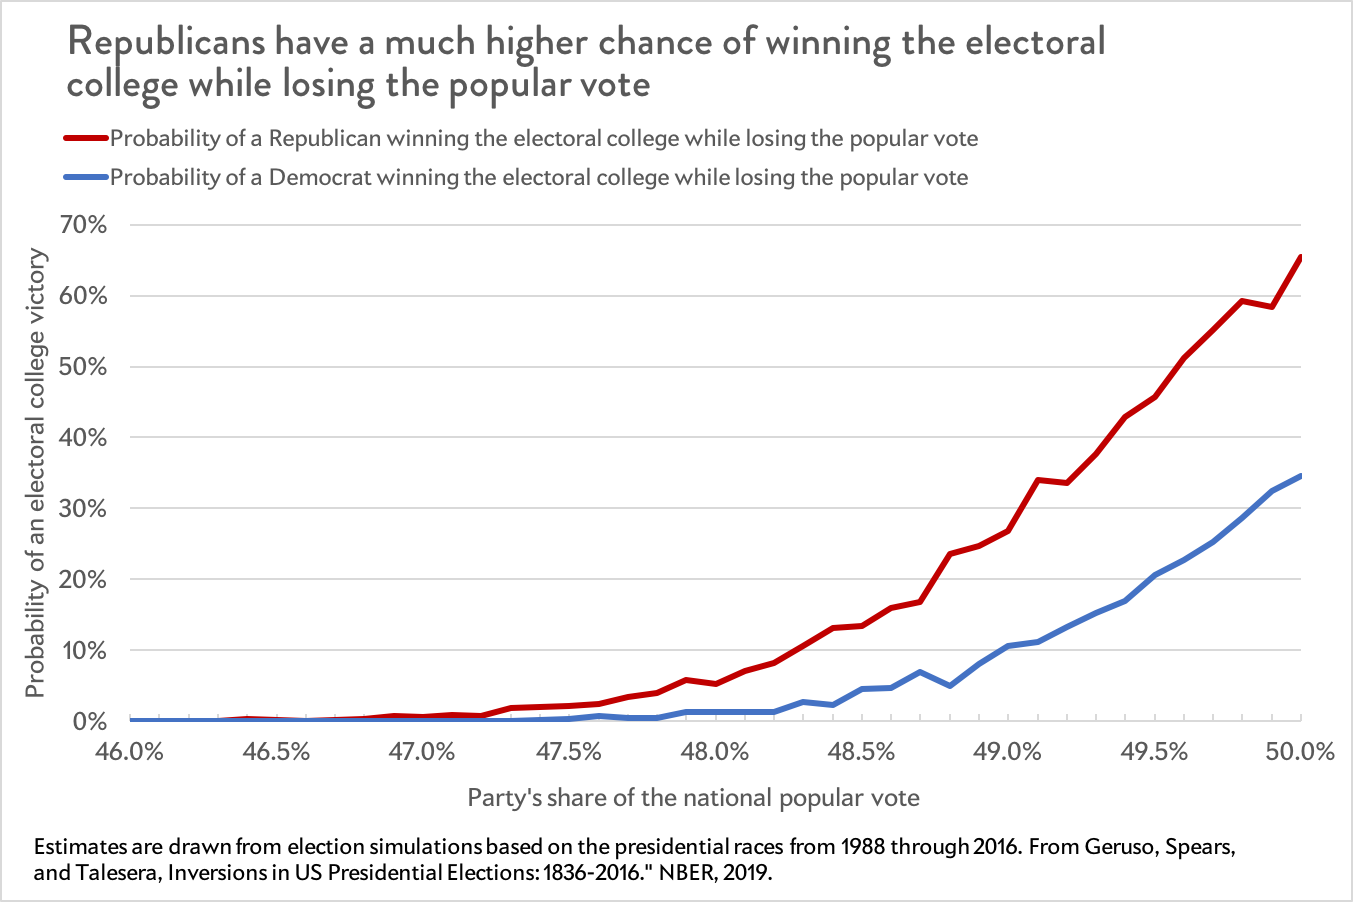 Republicans have a much higher chance of winning the electoral college and losing the popular vote